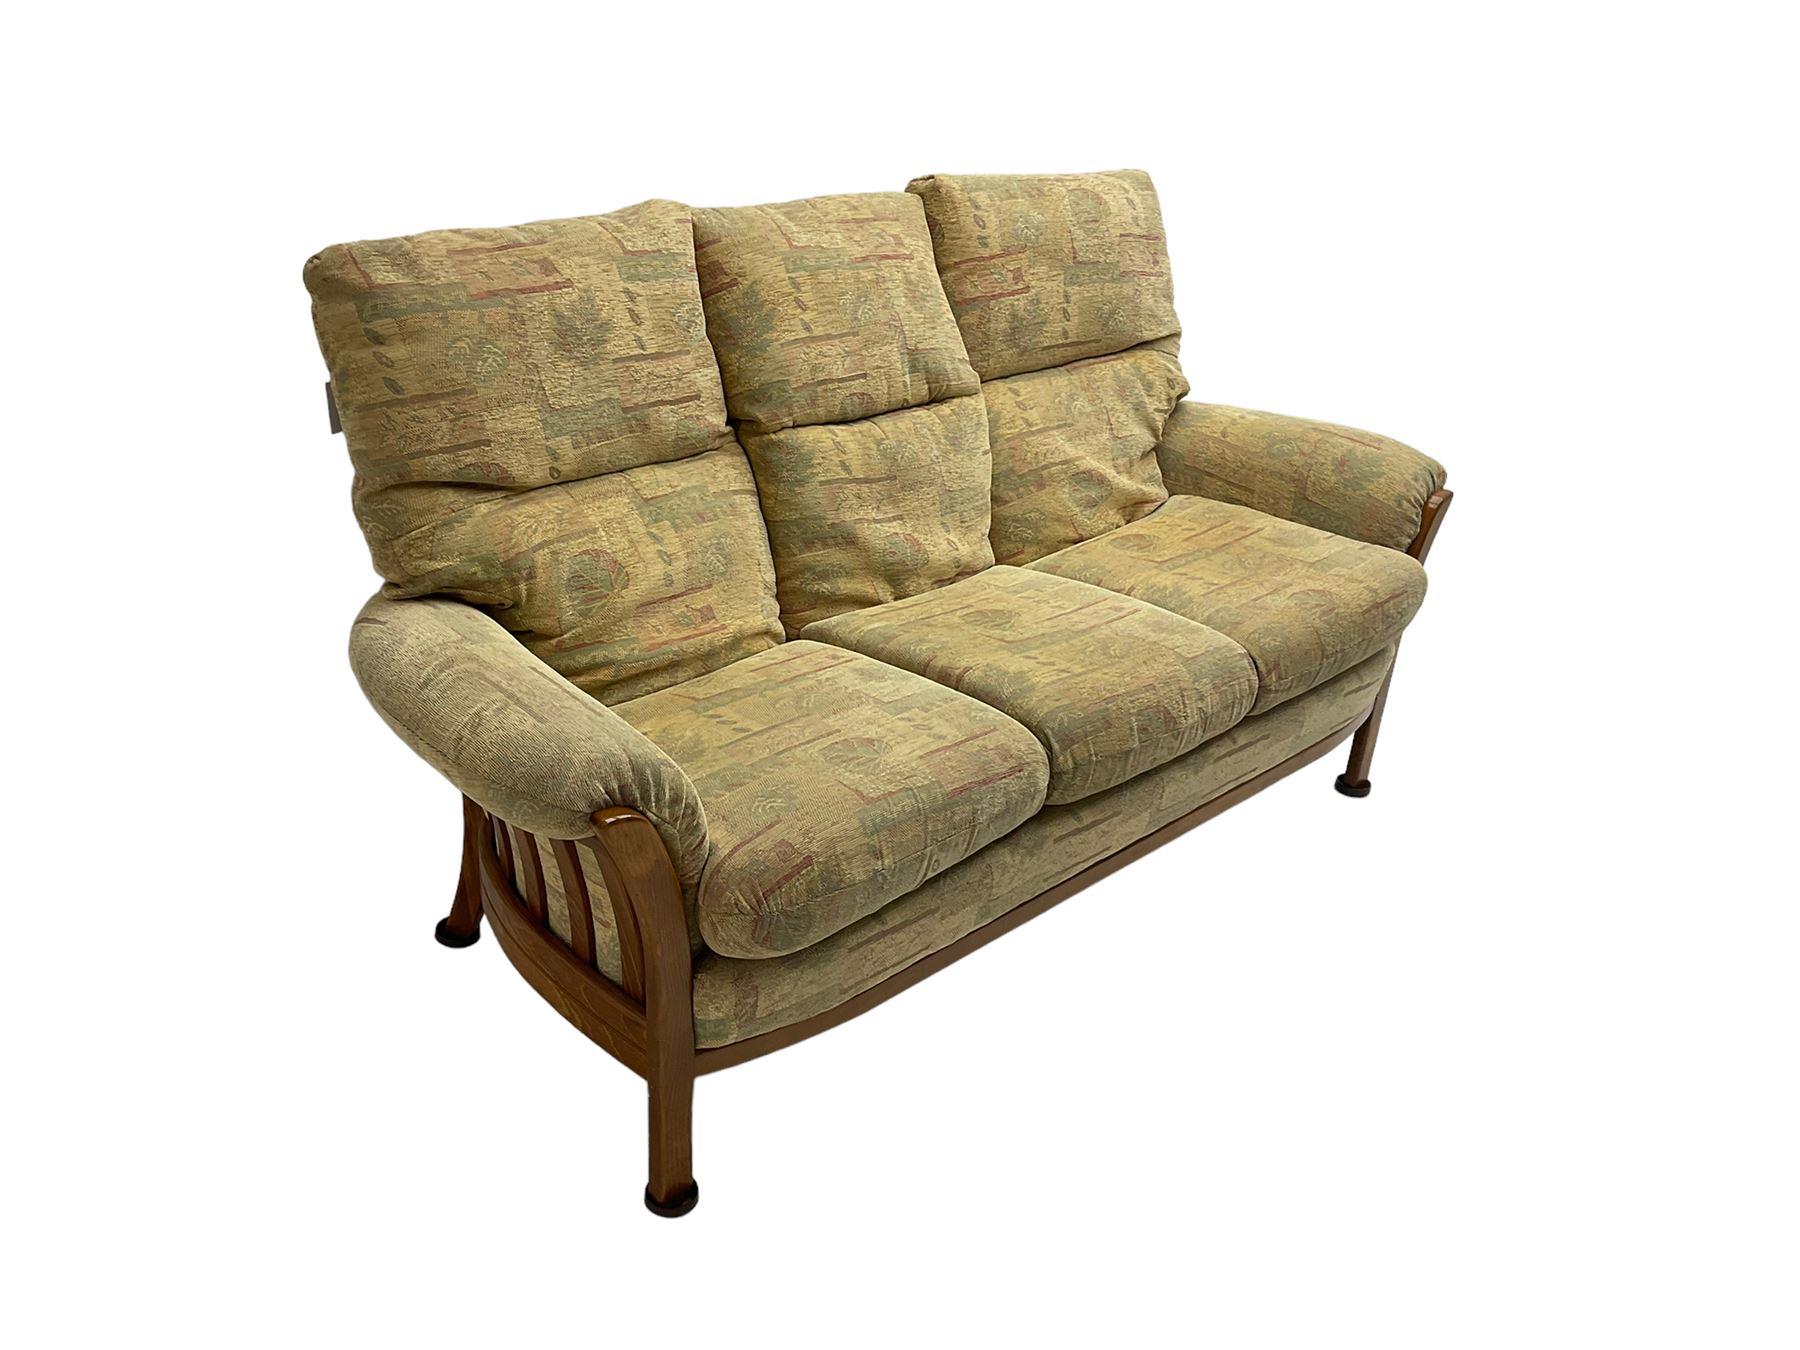 Mid-20th century beech framed three seat sofa (W1180cm) and pair of matching armchairs (W95cm) uphol - Image 10 of 15